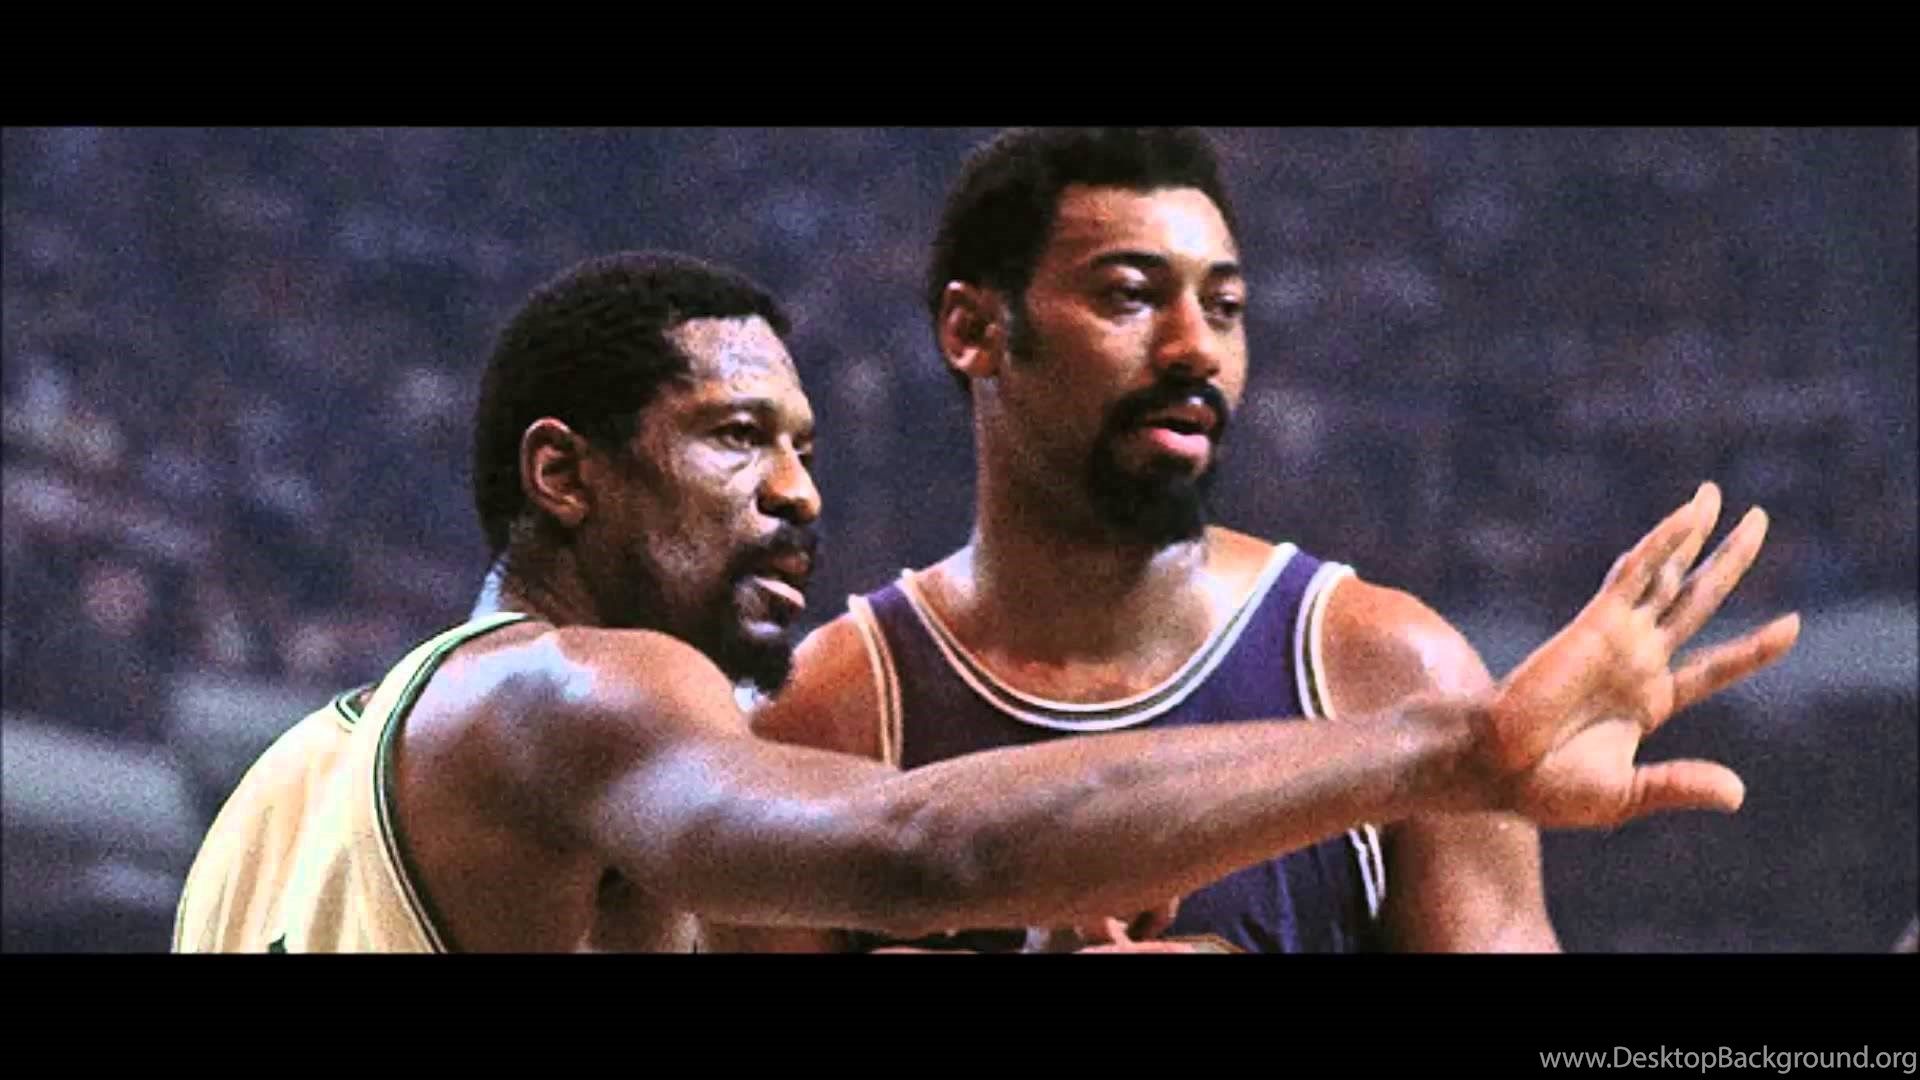 Bill Russell Was Great, But He Was No Wilt Chamberlain YouTube